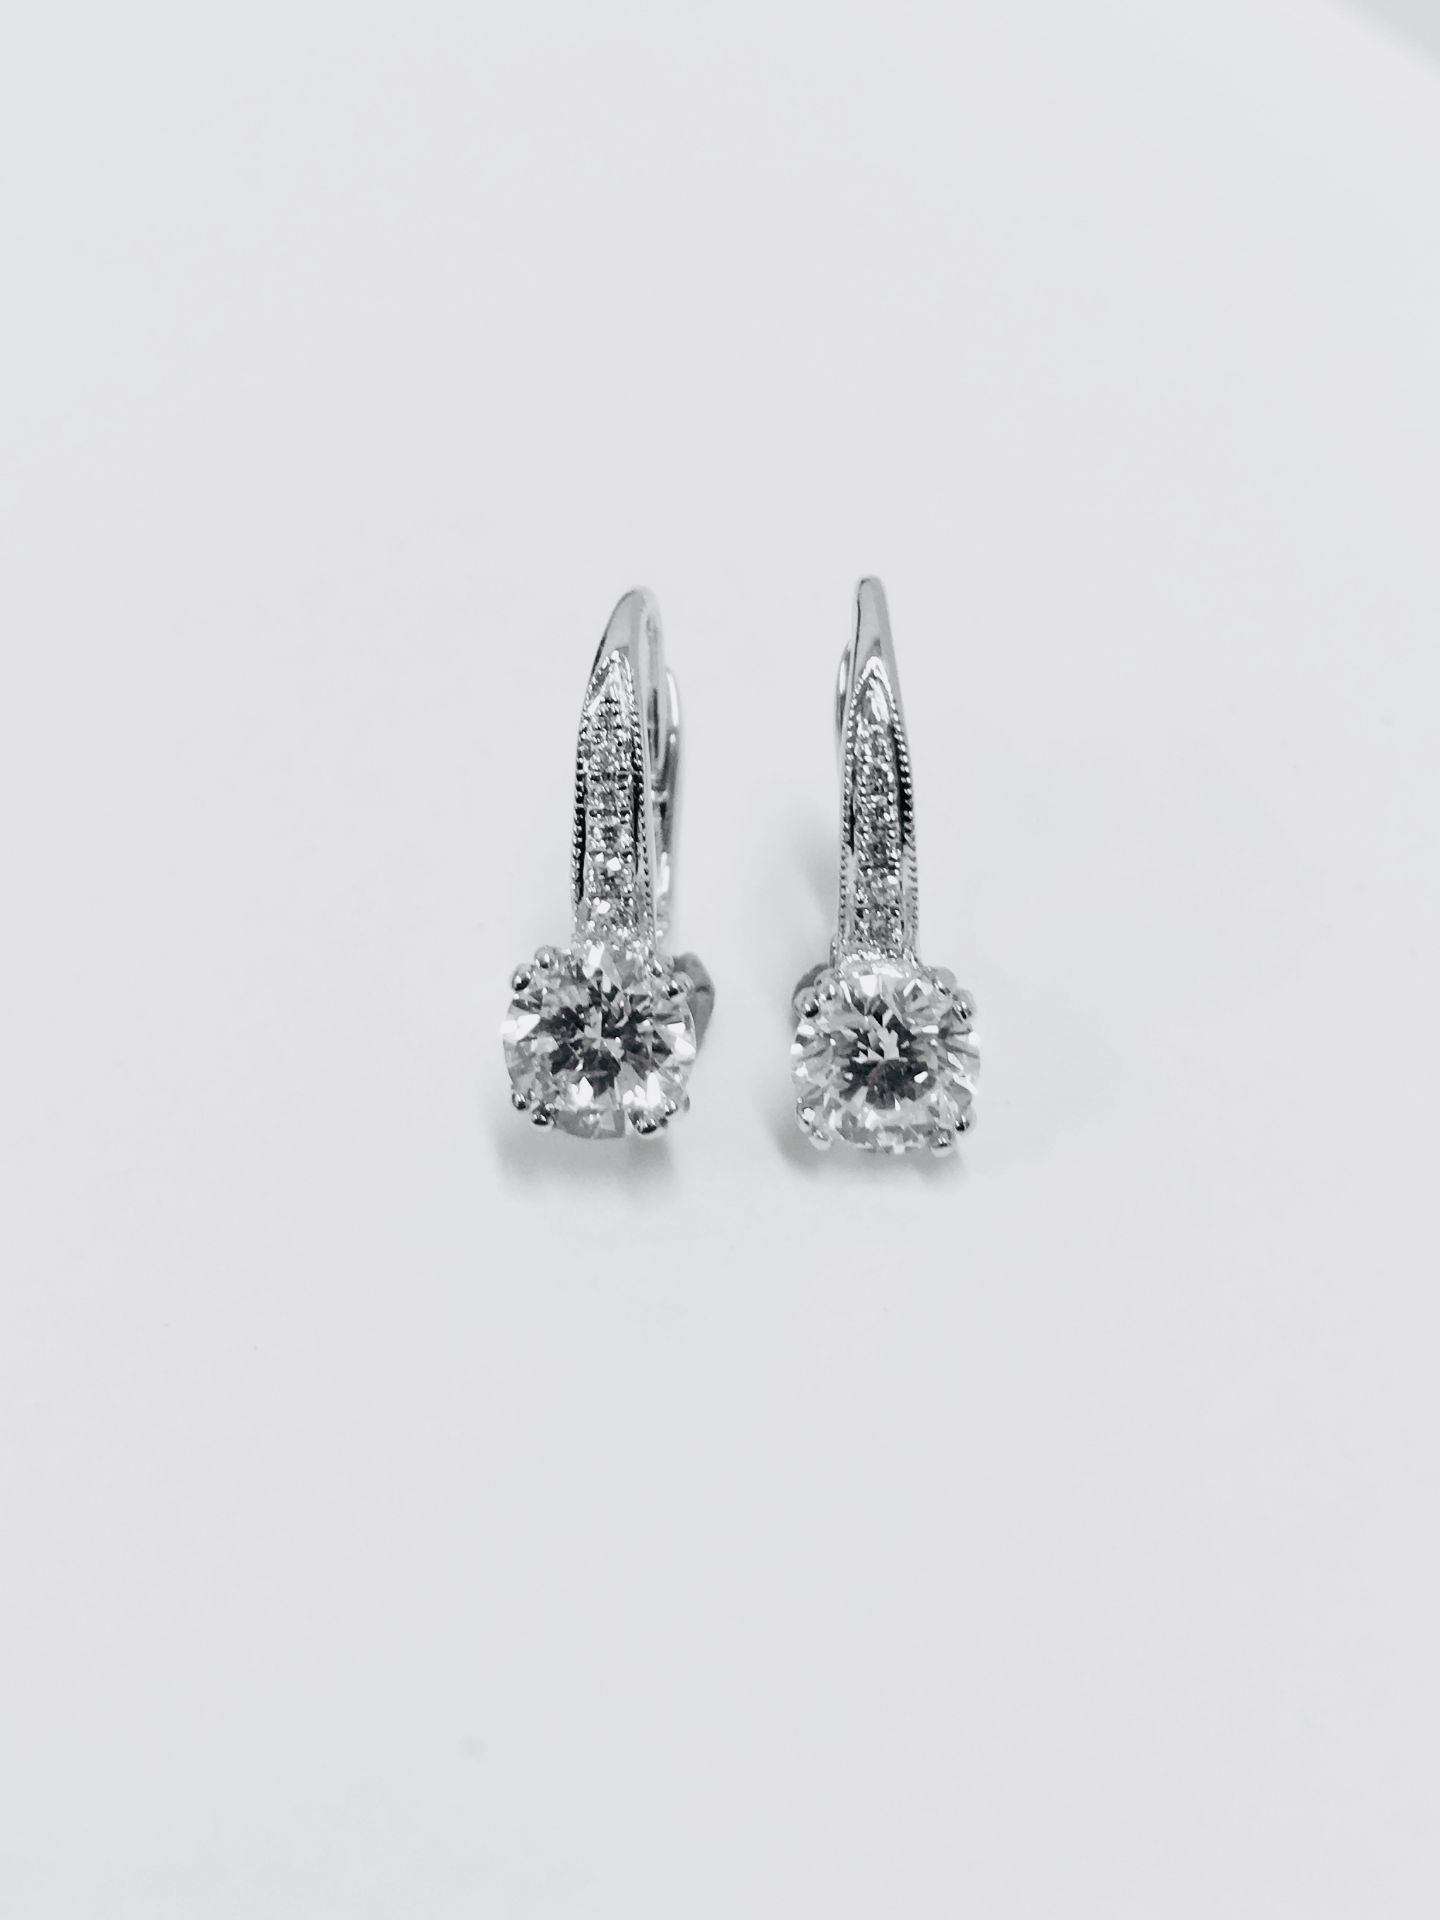 18ct white gold hoop style earrings with hinge fastners. 2 x 0.50ct Brilliant cut diamonds, i colour